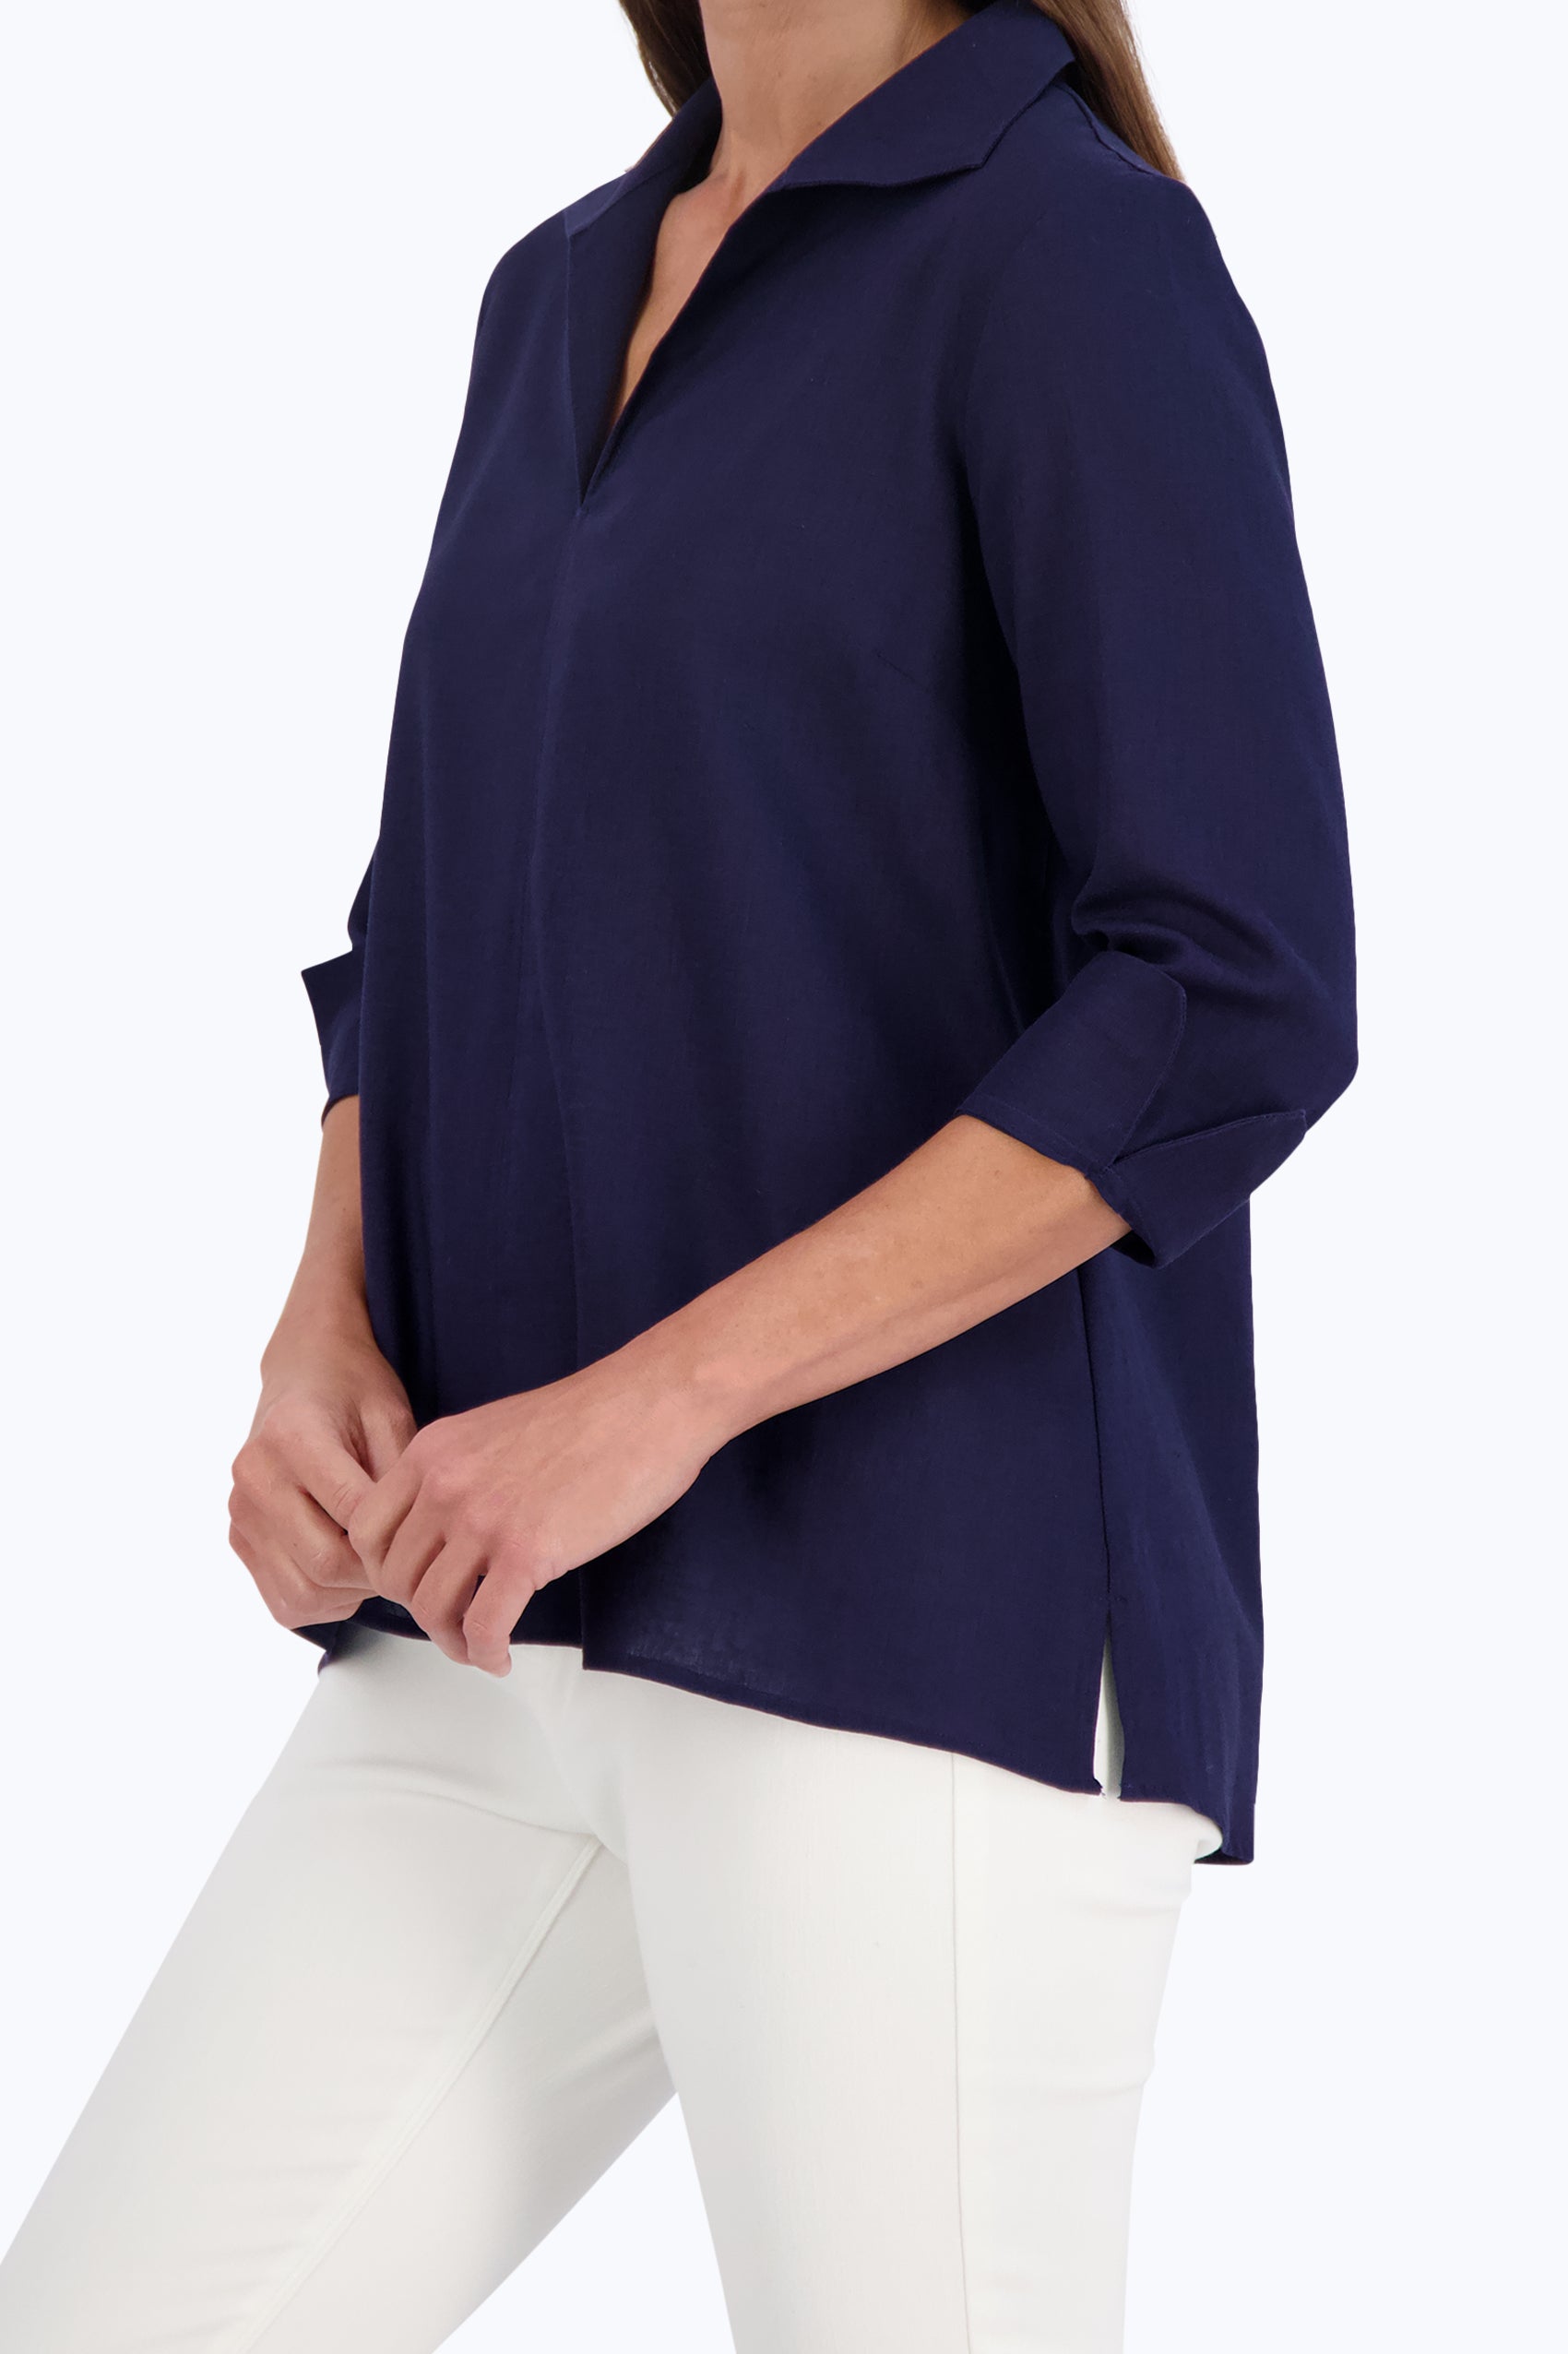 Agnes Easy Care Solid Linen Popover Shirt